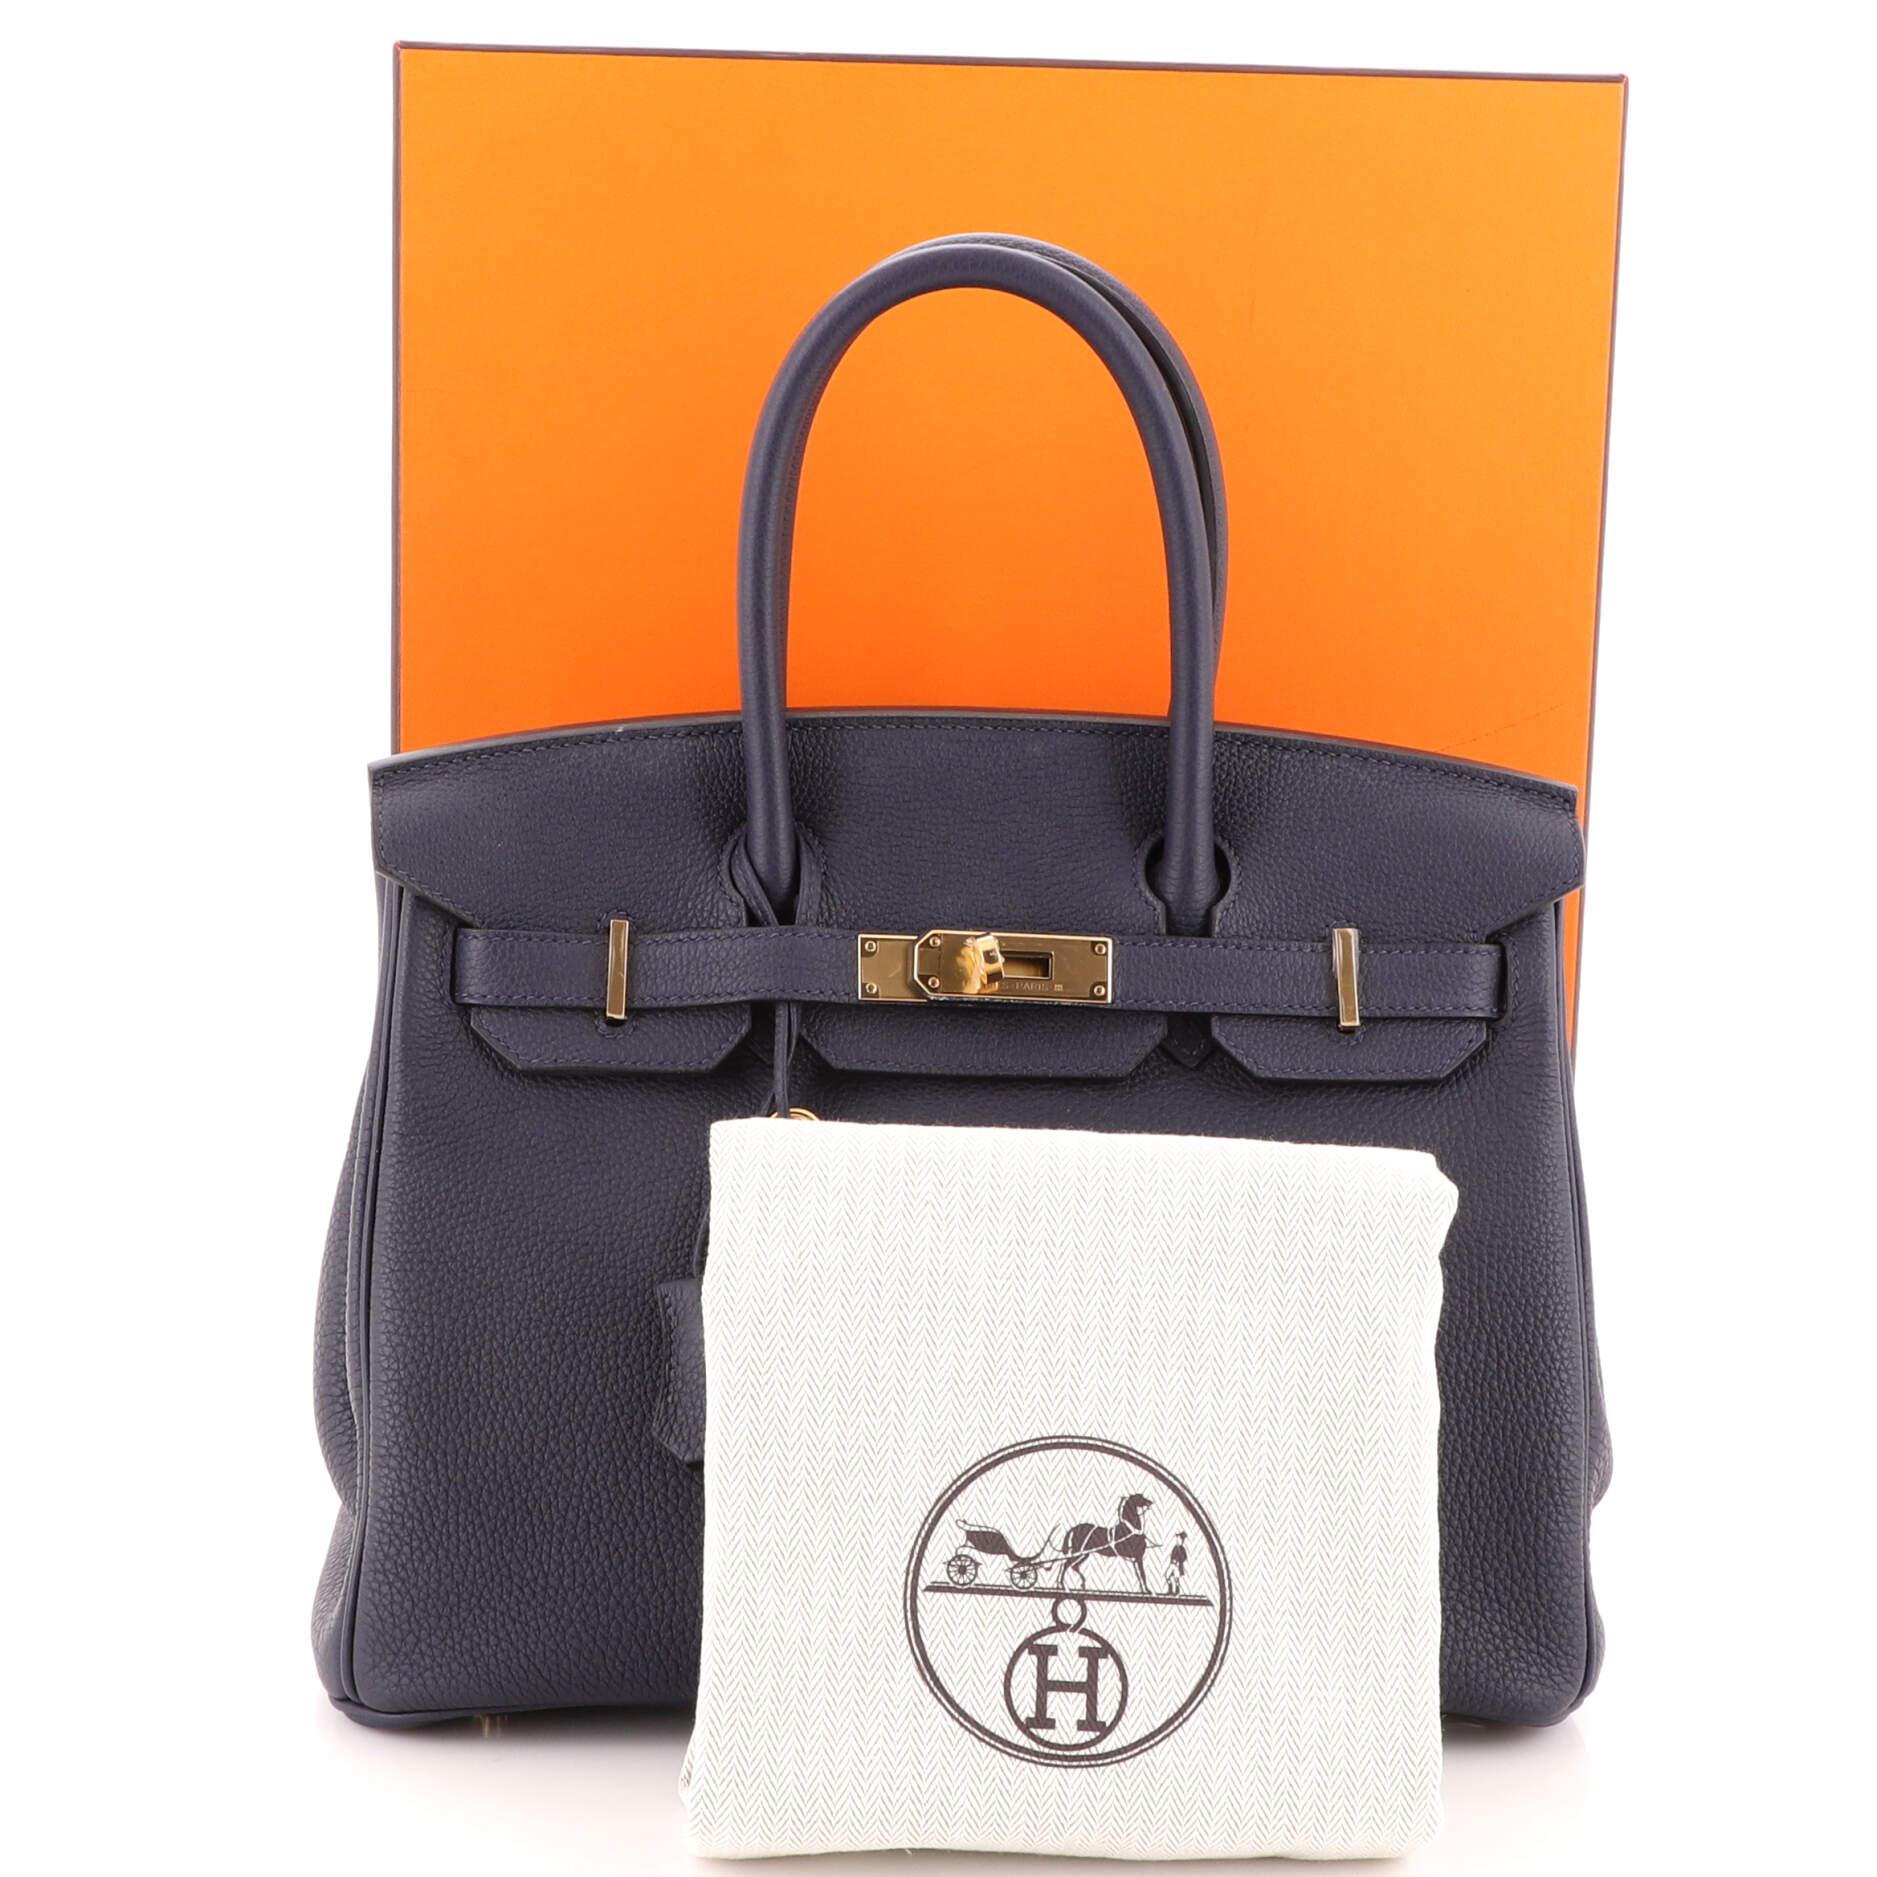 Birkin 30cms, togo leather, Blue nuit, limited edition with Rose Gold  Hardware